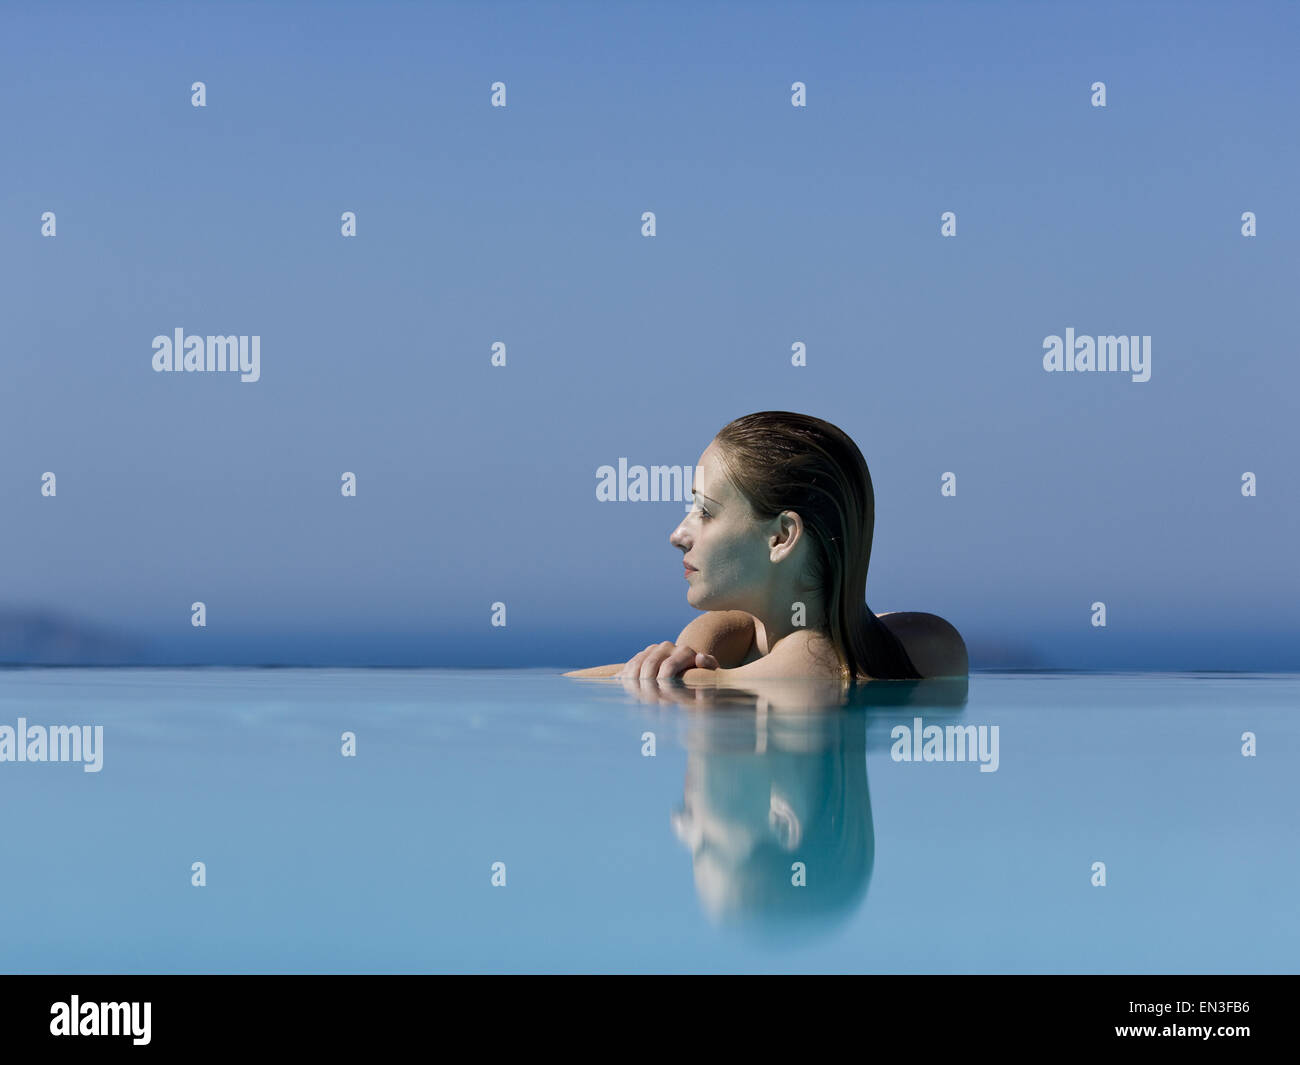 Woman in infinity pool reflection Stock Photo